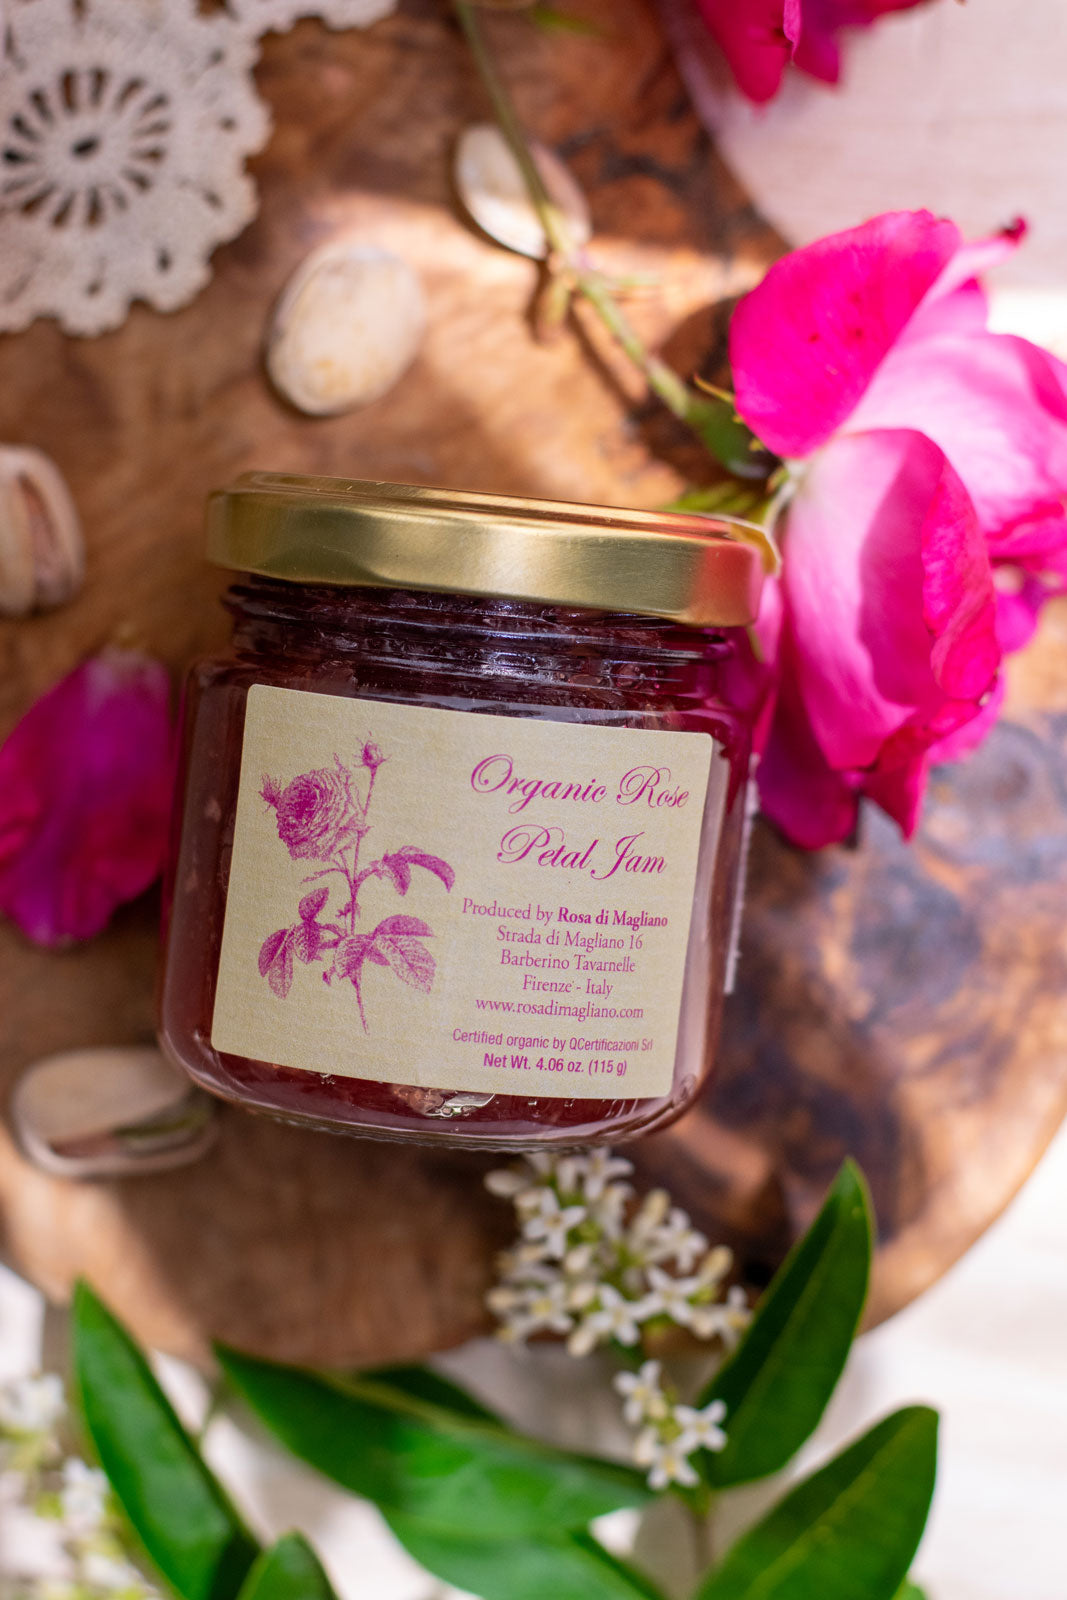 Jar of Organic Rose Petal Jam artfully displayed on a cutting board surrounded by roses and lace